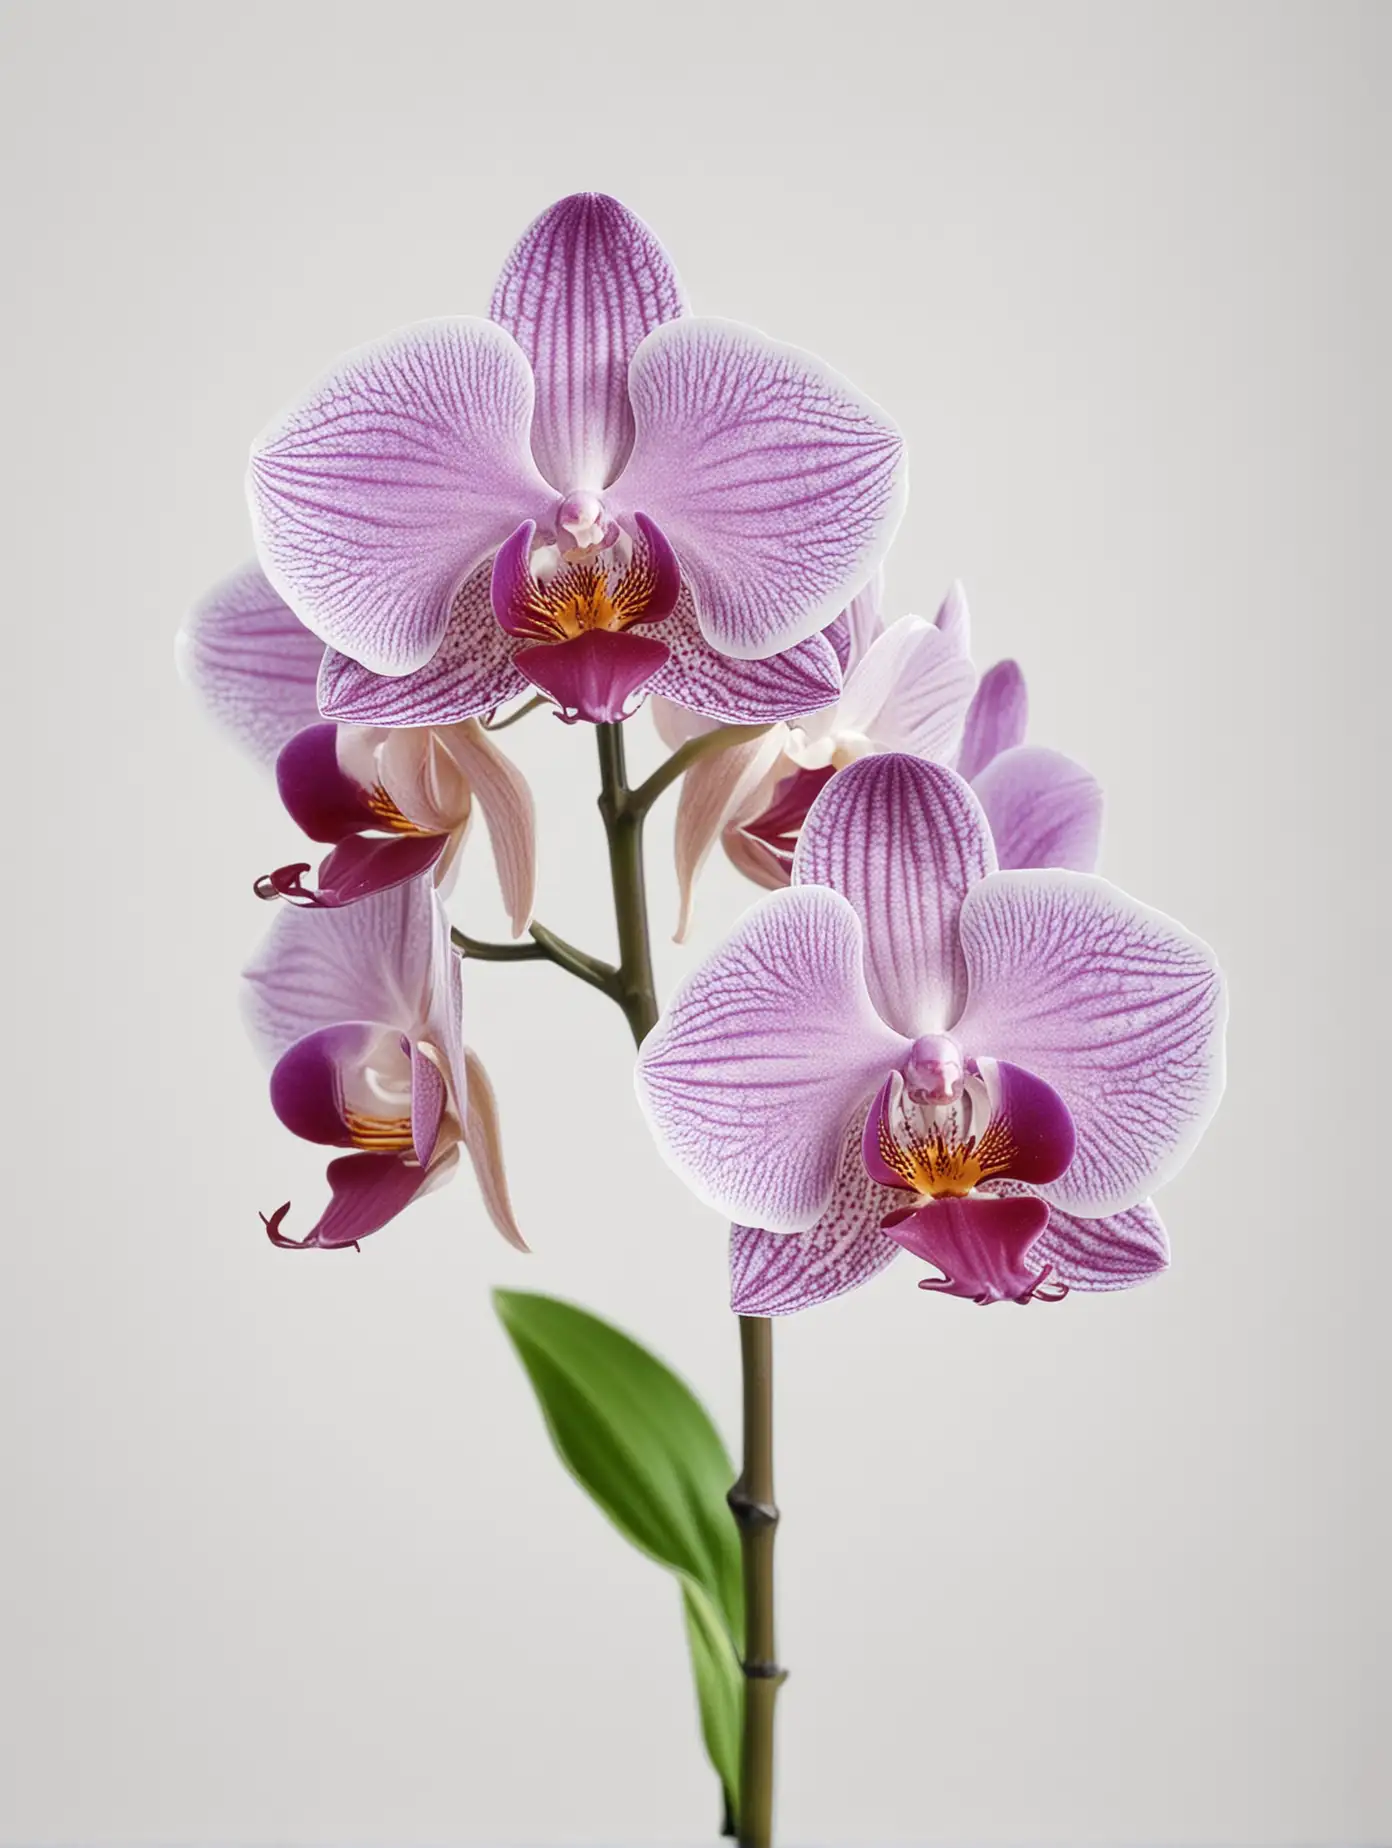 vibrant orchid on an all-white background

